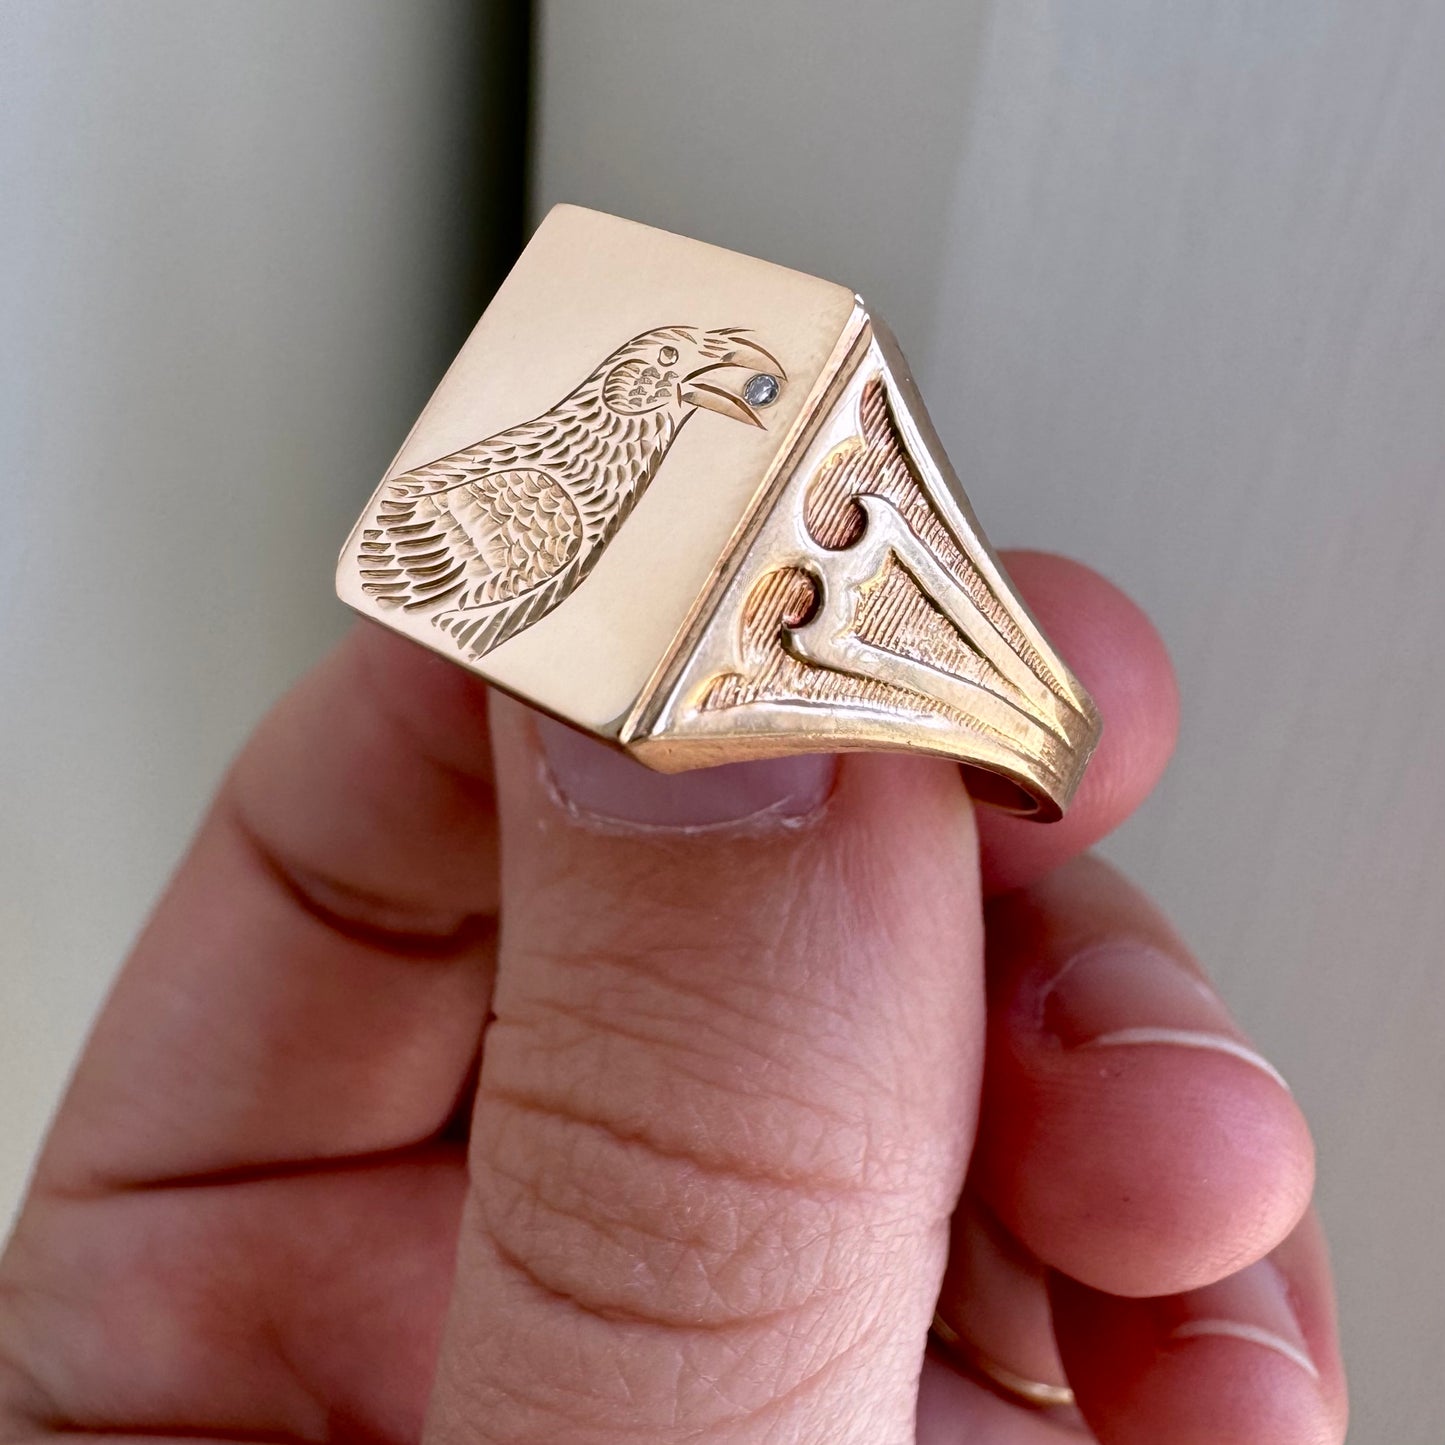 reimagined A N T I Q U E // treasure seeker / 10k rosy gold signet with new crow engraving / size 12